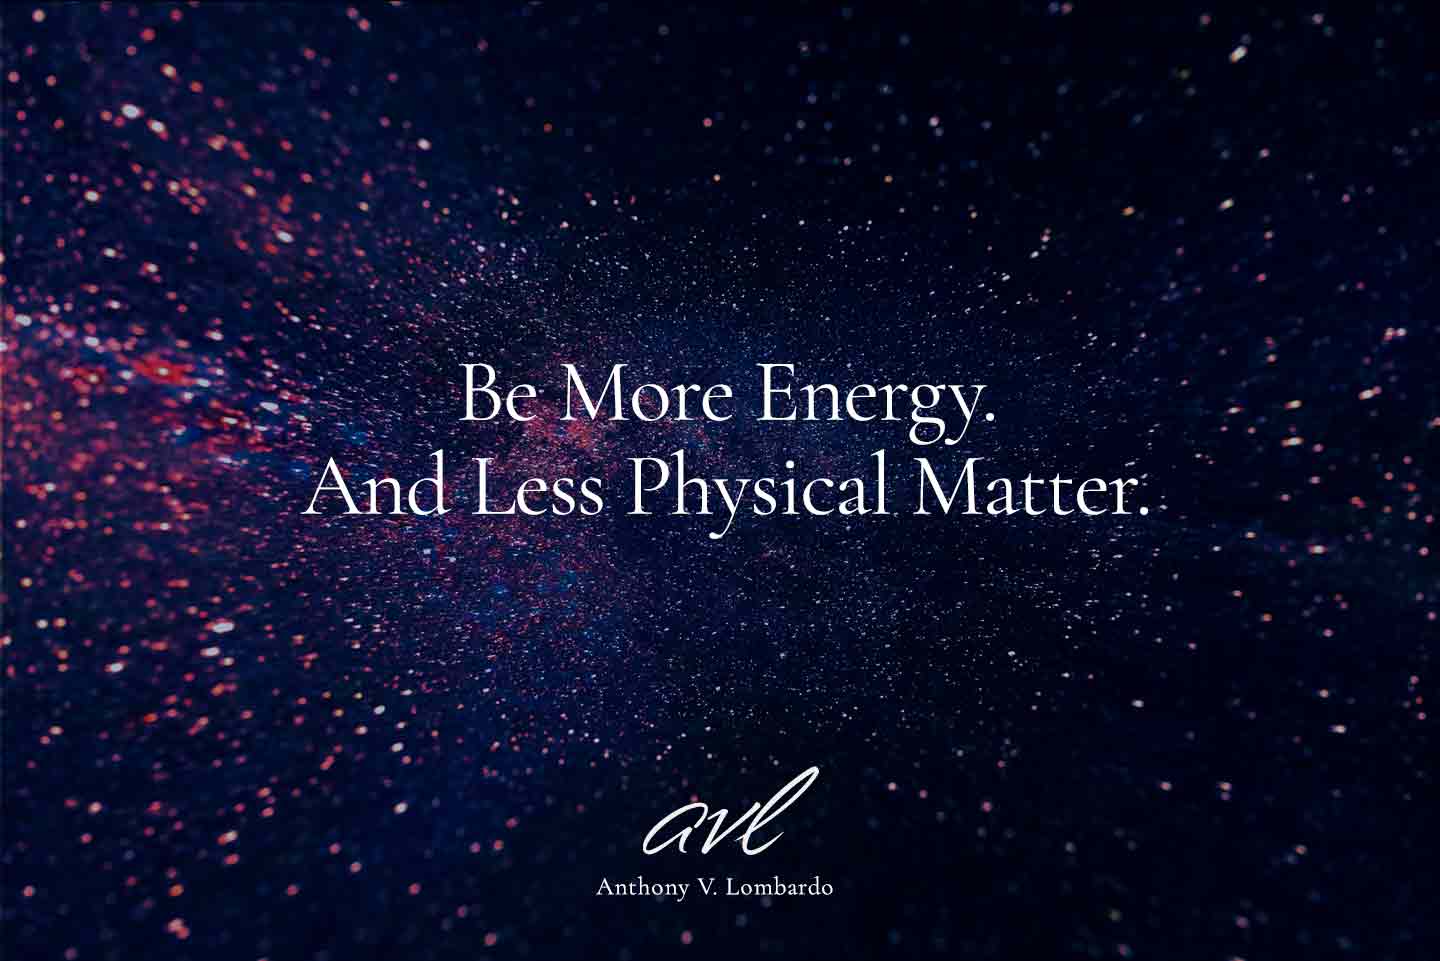 Be More Energy. And Less Physical Matter.